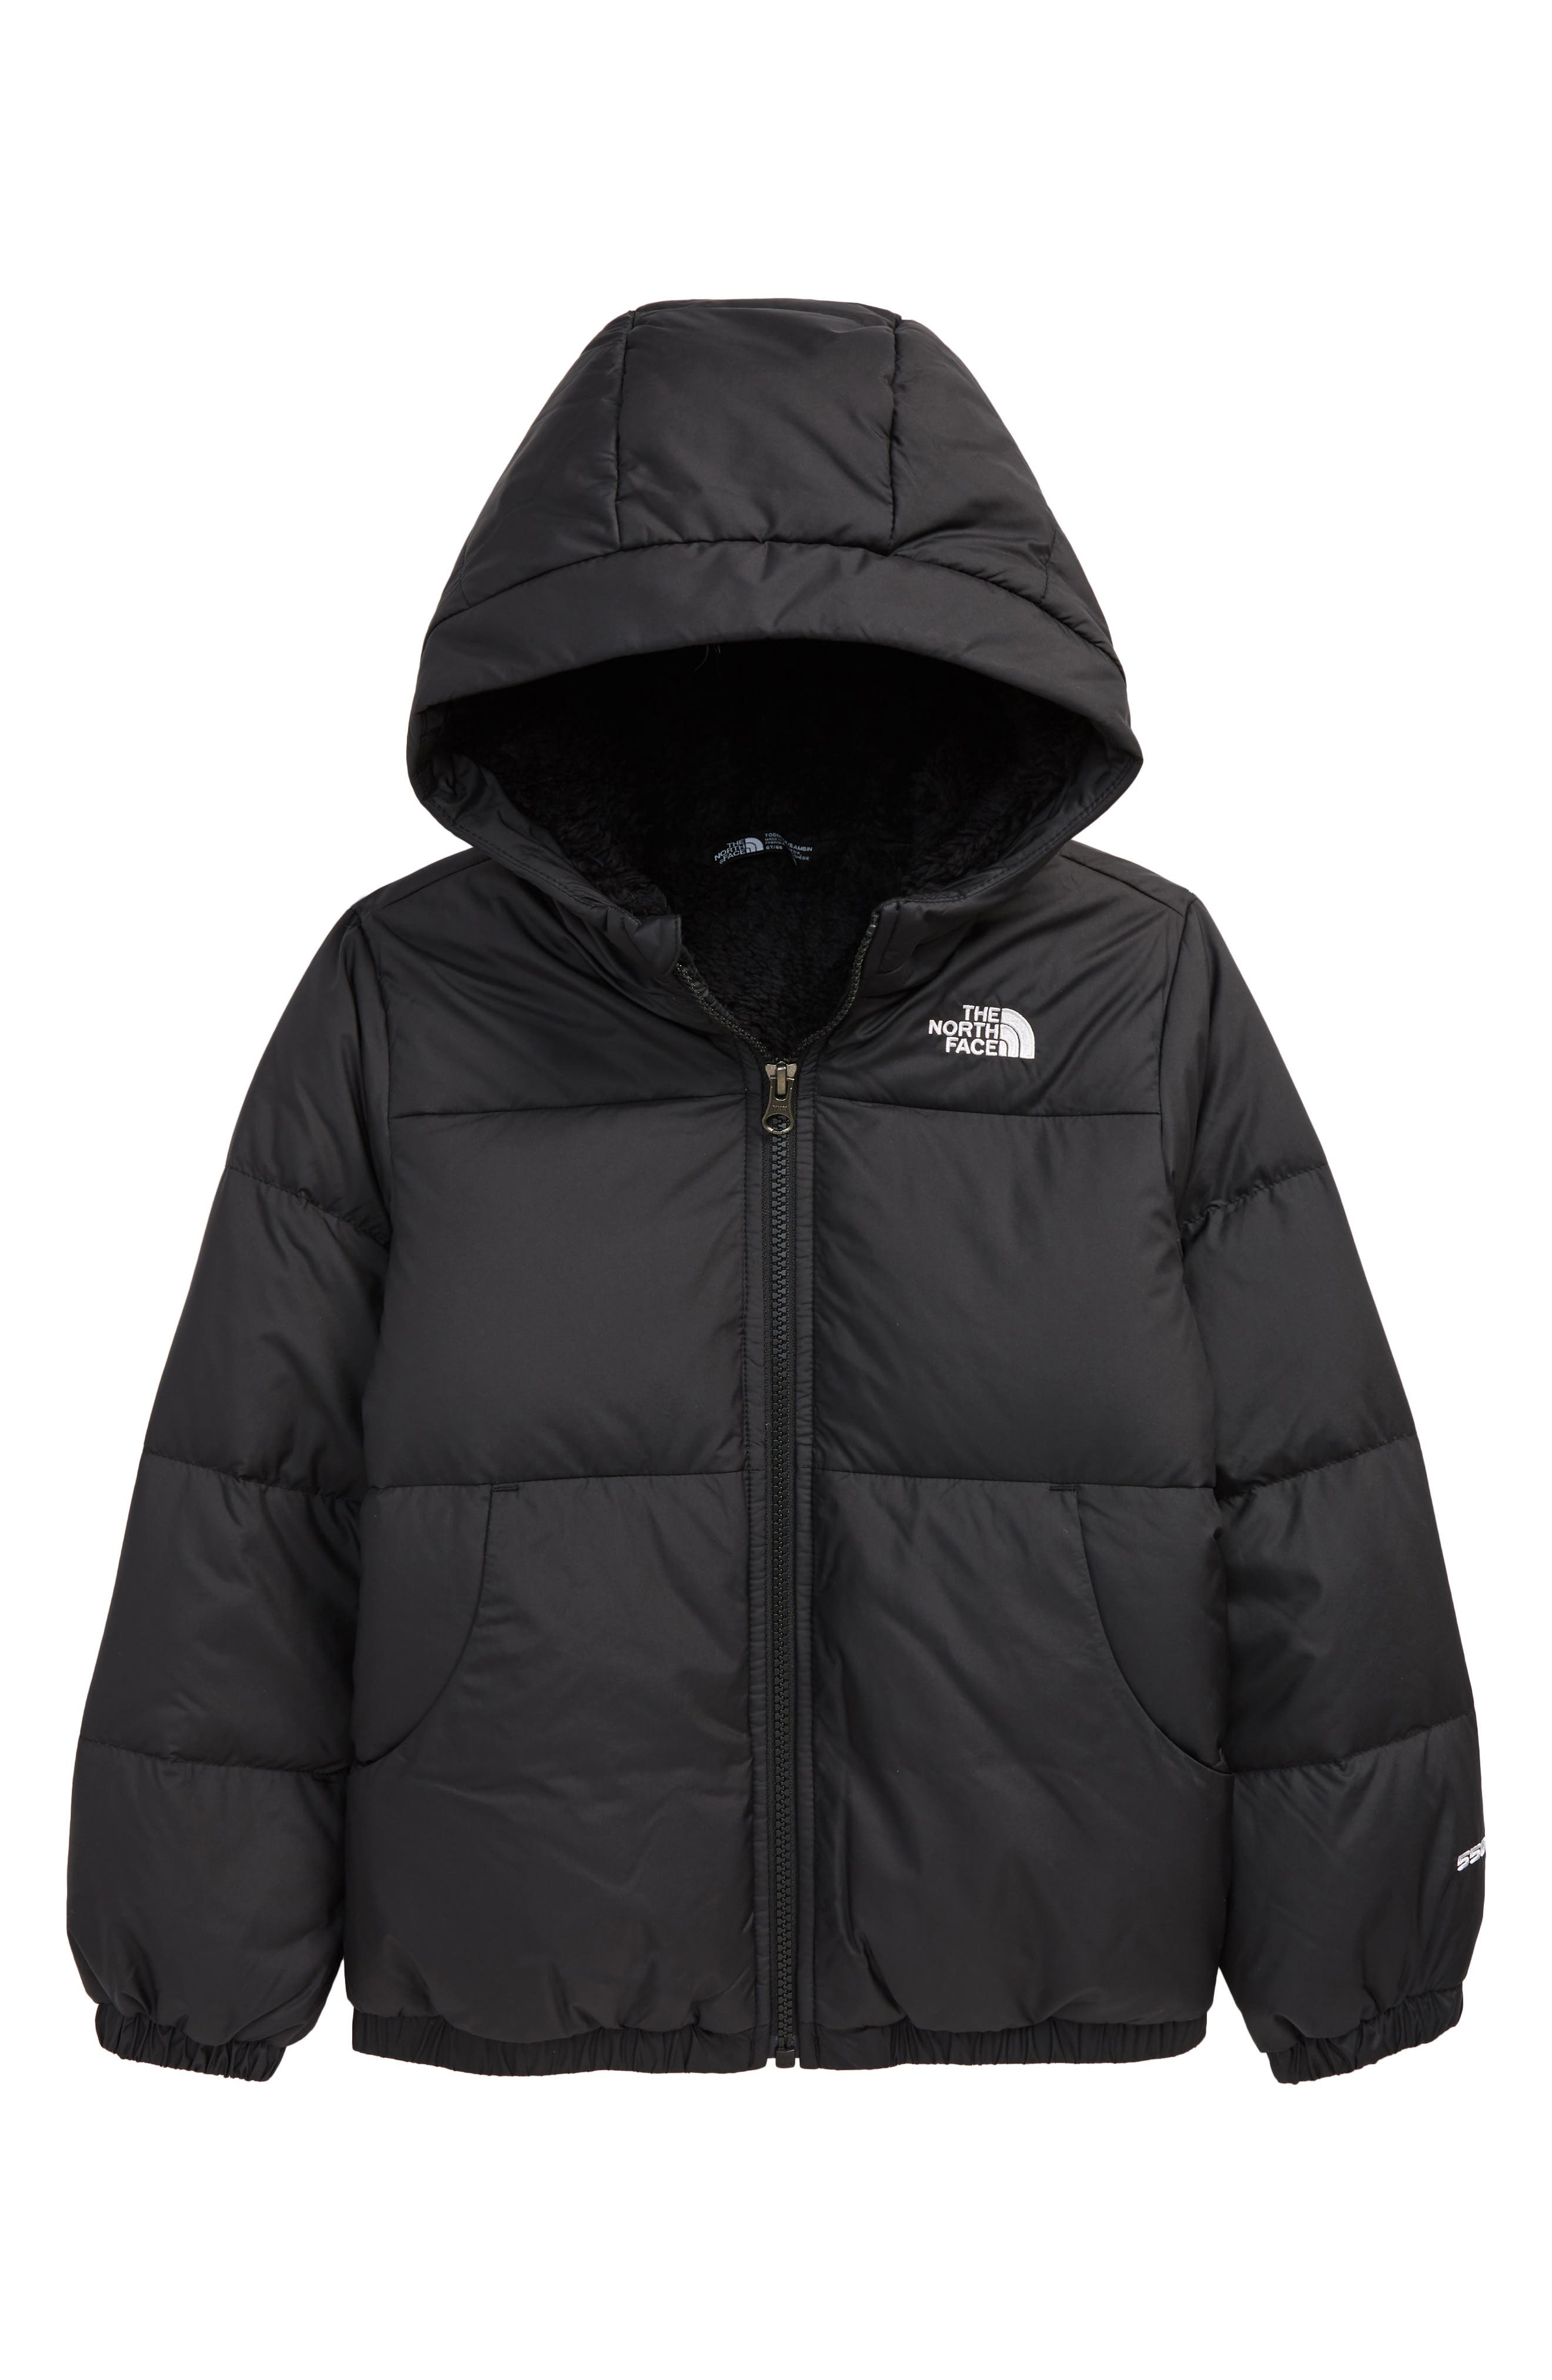 north face clearance sale